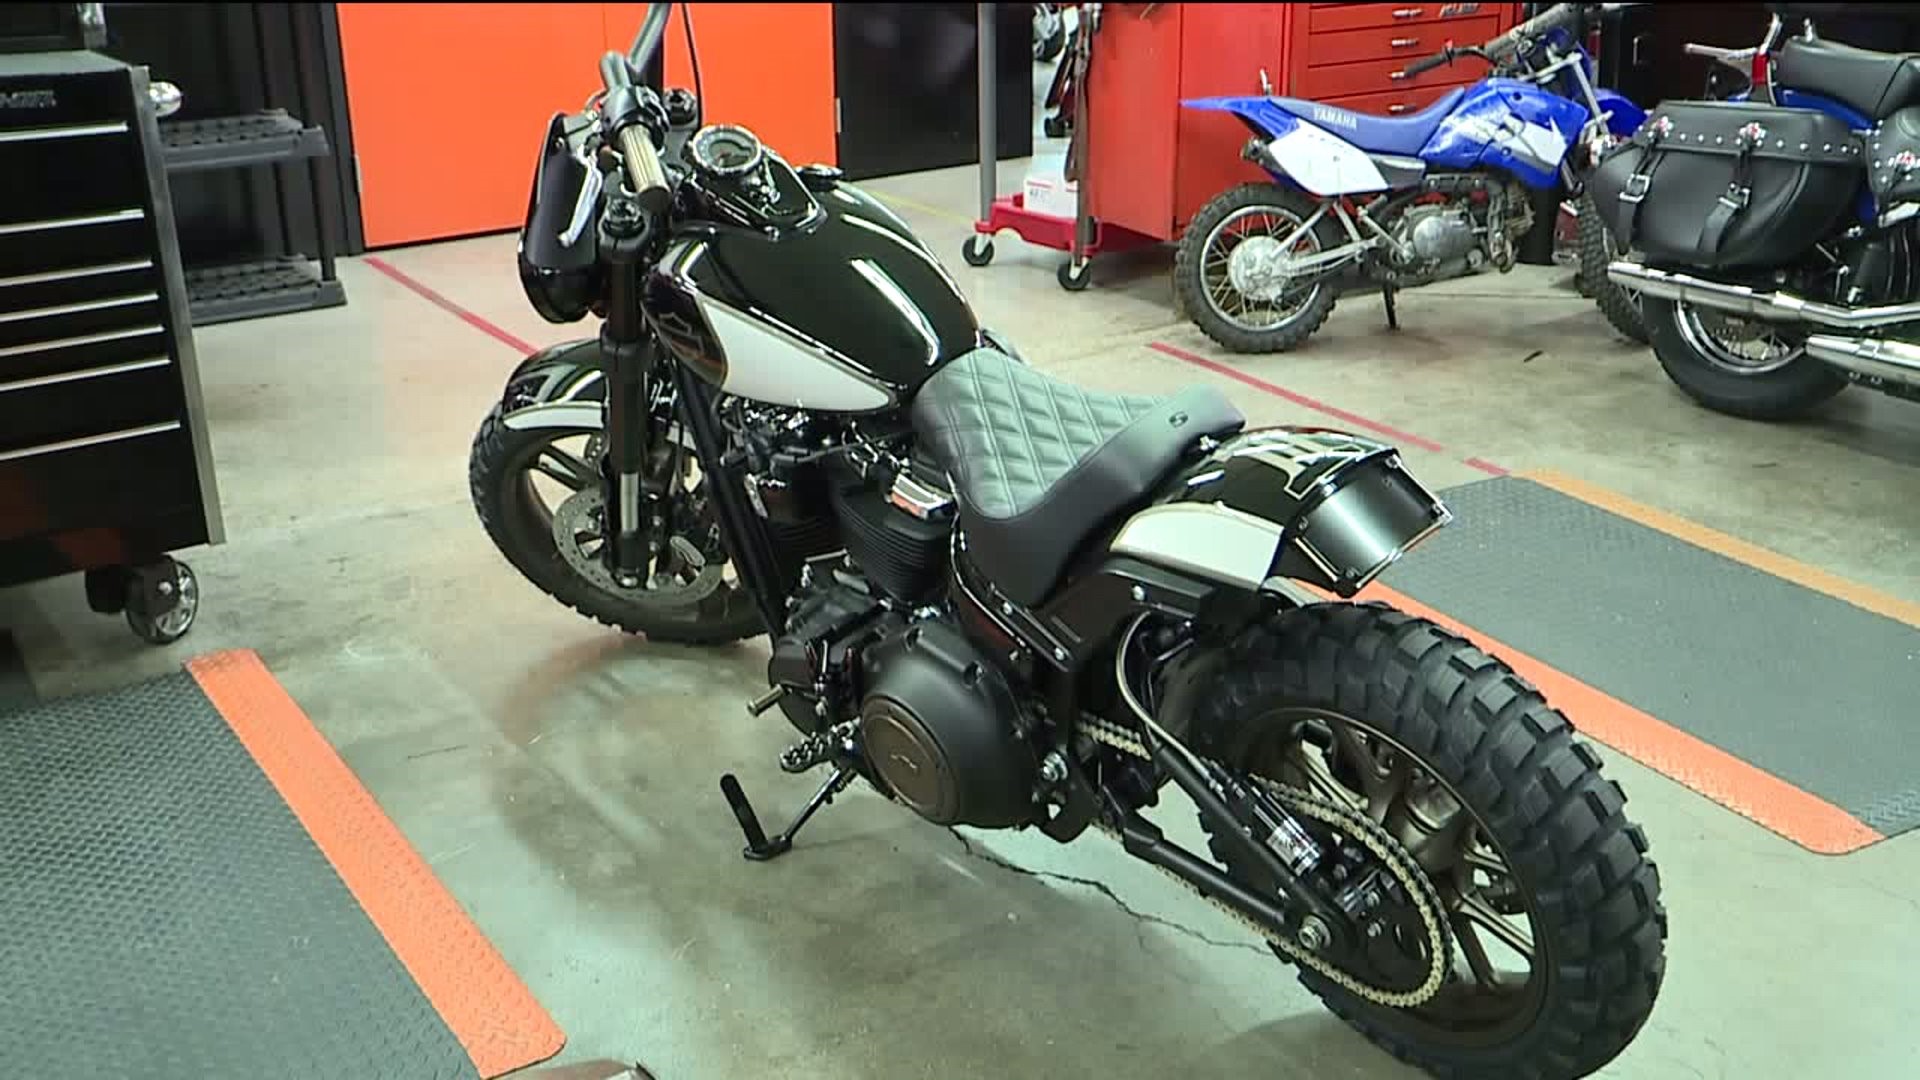 Students Design and Build Motorcycle for Competition